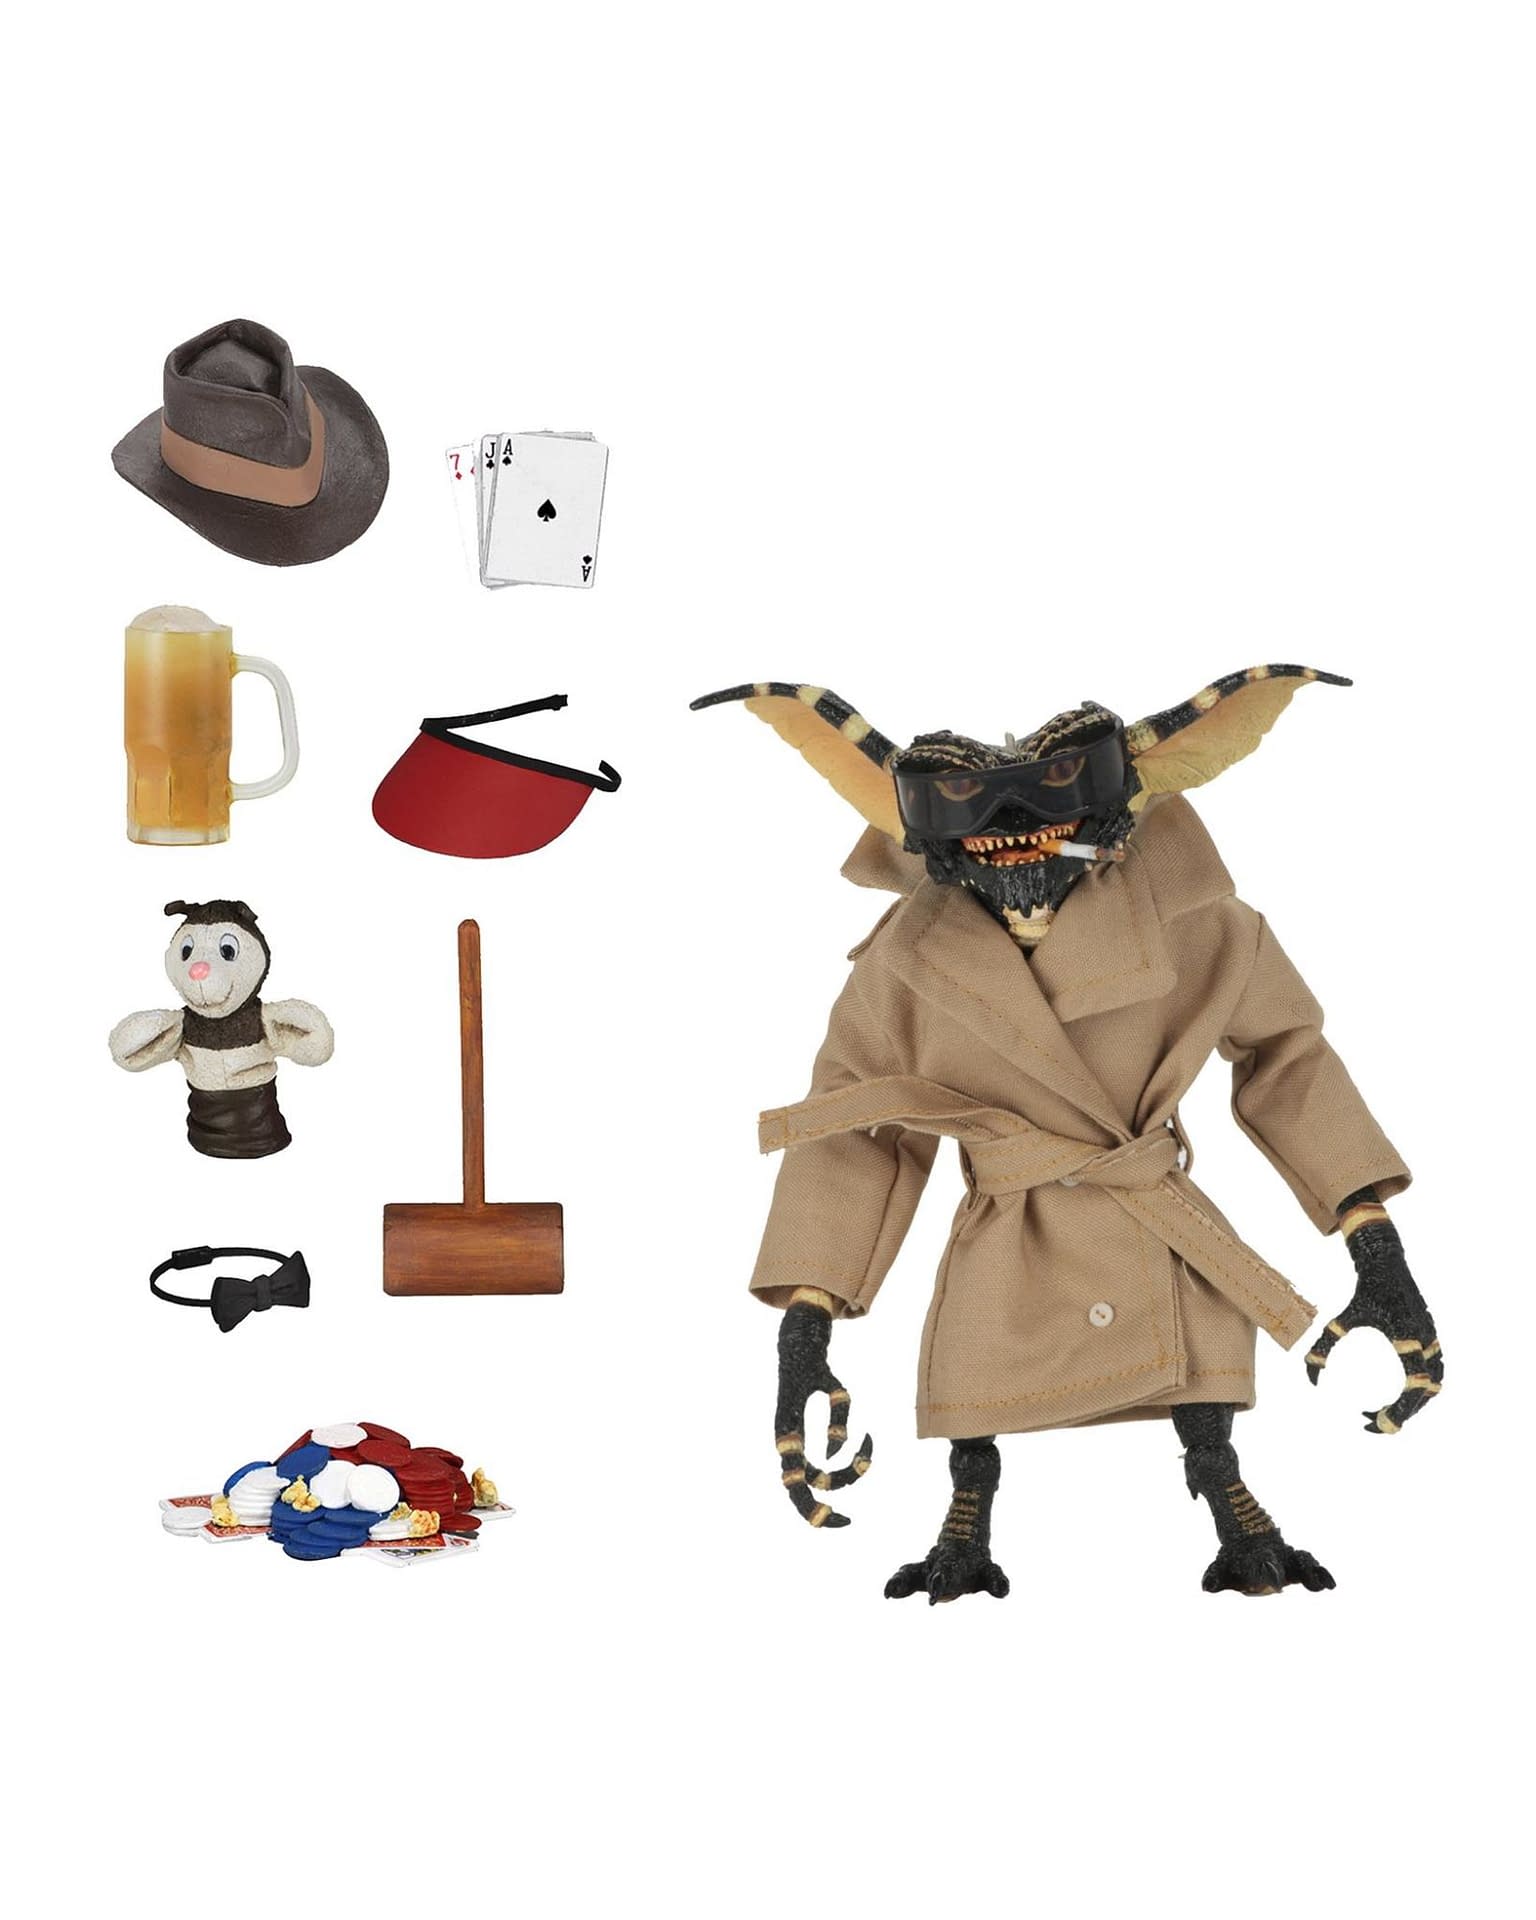 NECA Releases a Flasher with New 